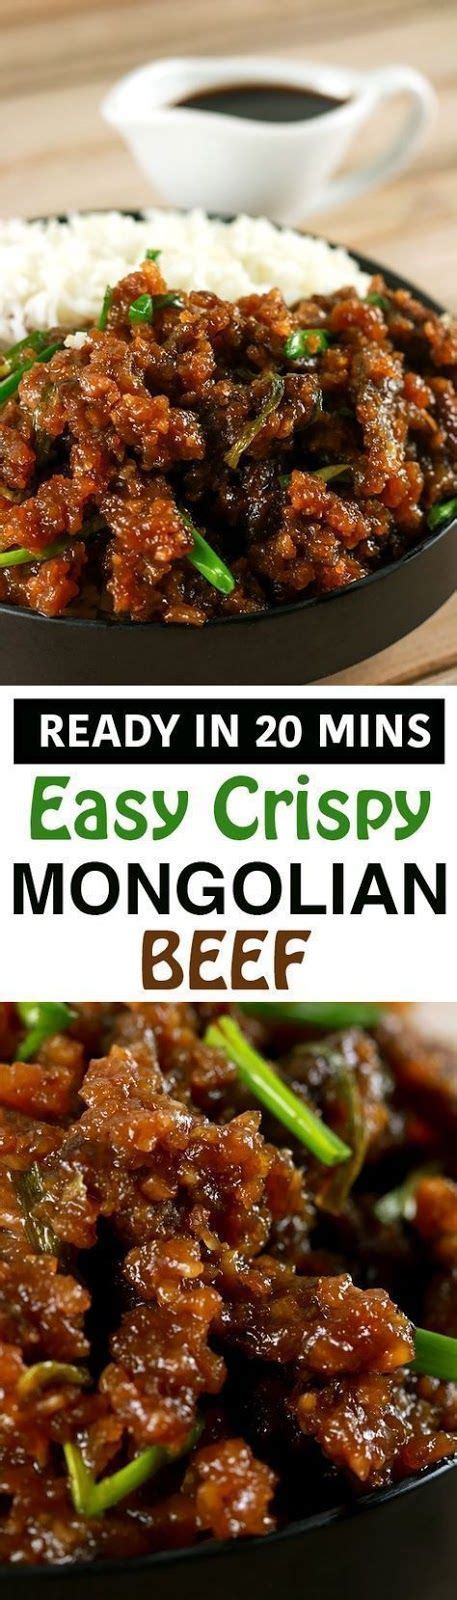 Seal the bag and toss to coat. EASY CRISPY MONGOLIAN BEEF This Mongolian Beef recipe is ...